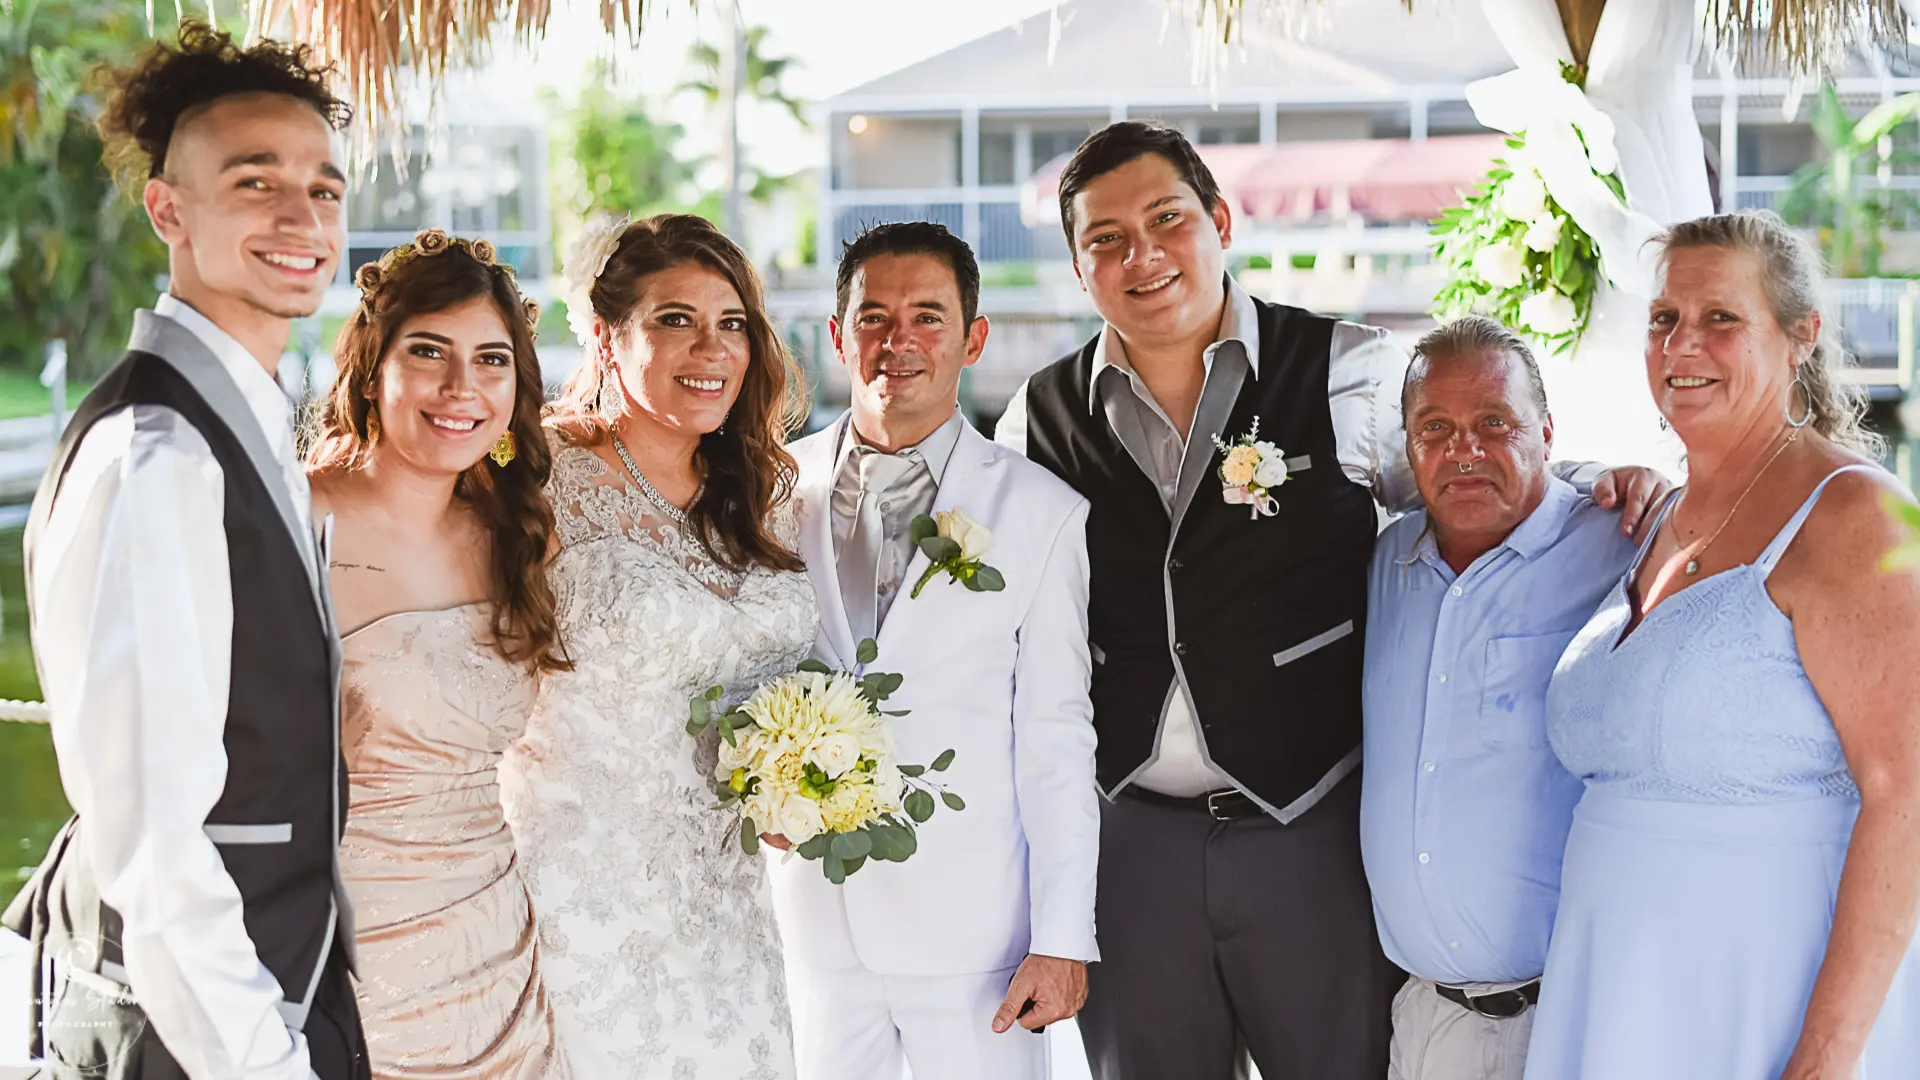 Group photo of small wedding in Florida